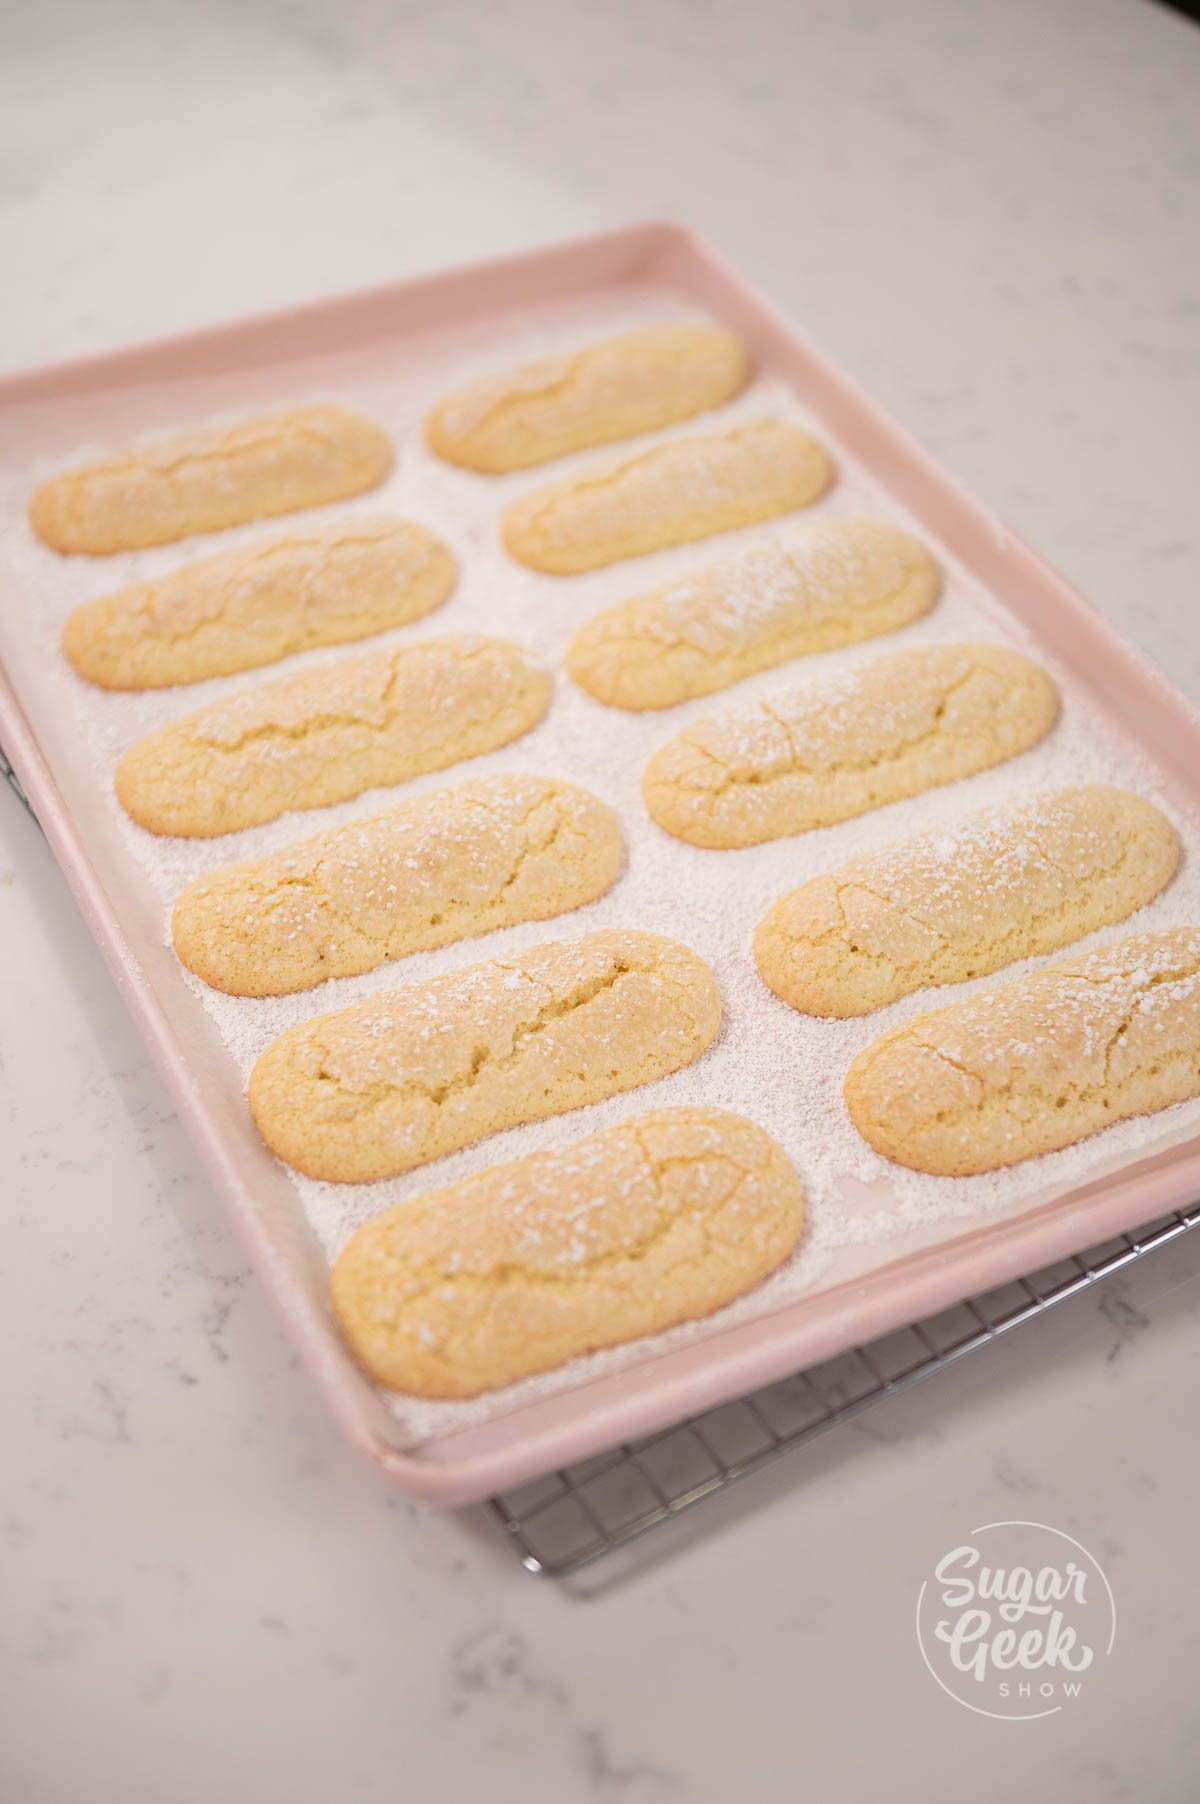 Tray filled with lady finger cookies.